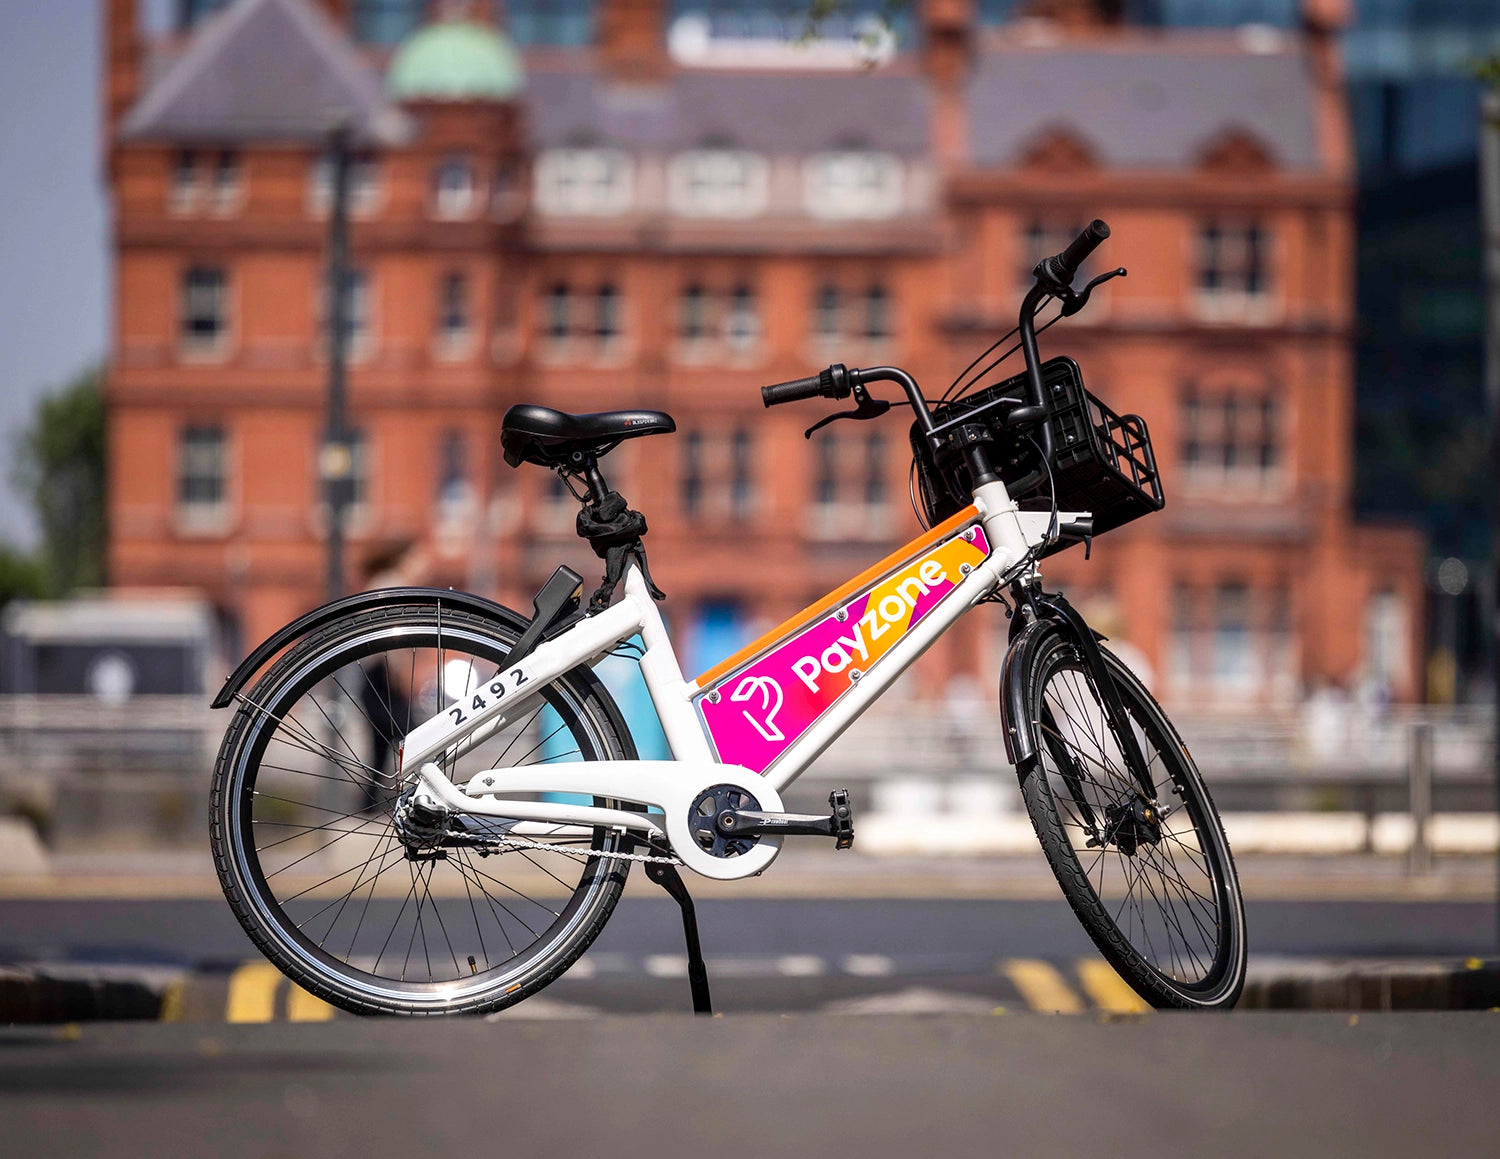 A photo of a Bleeper shared public bike with Payzone branding on its adboard. 